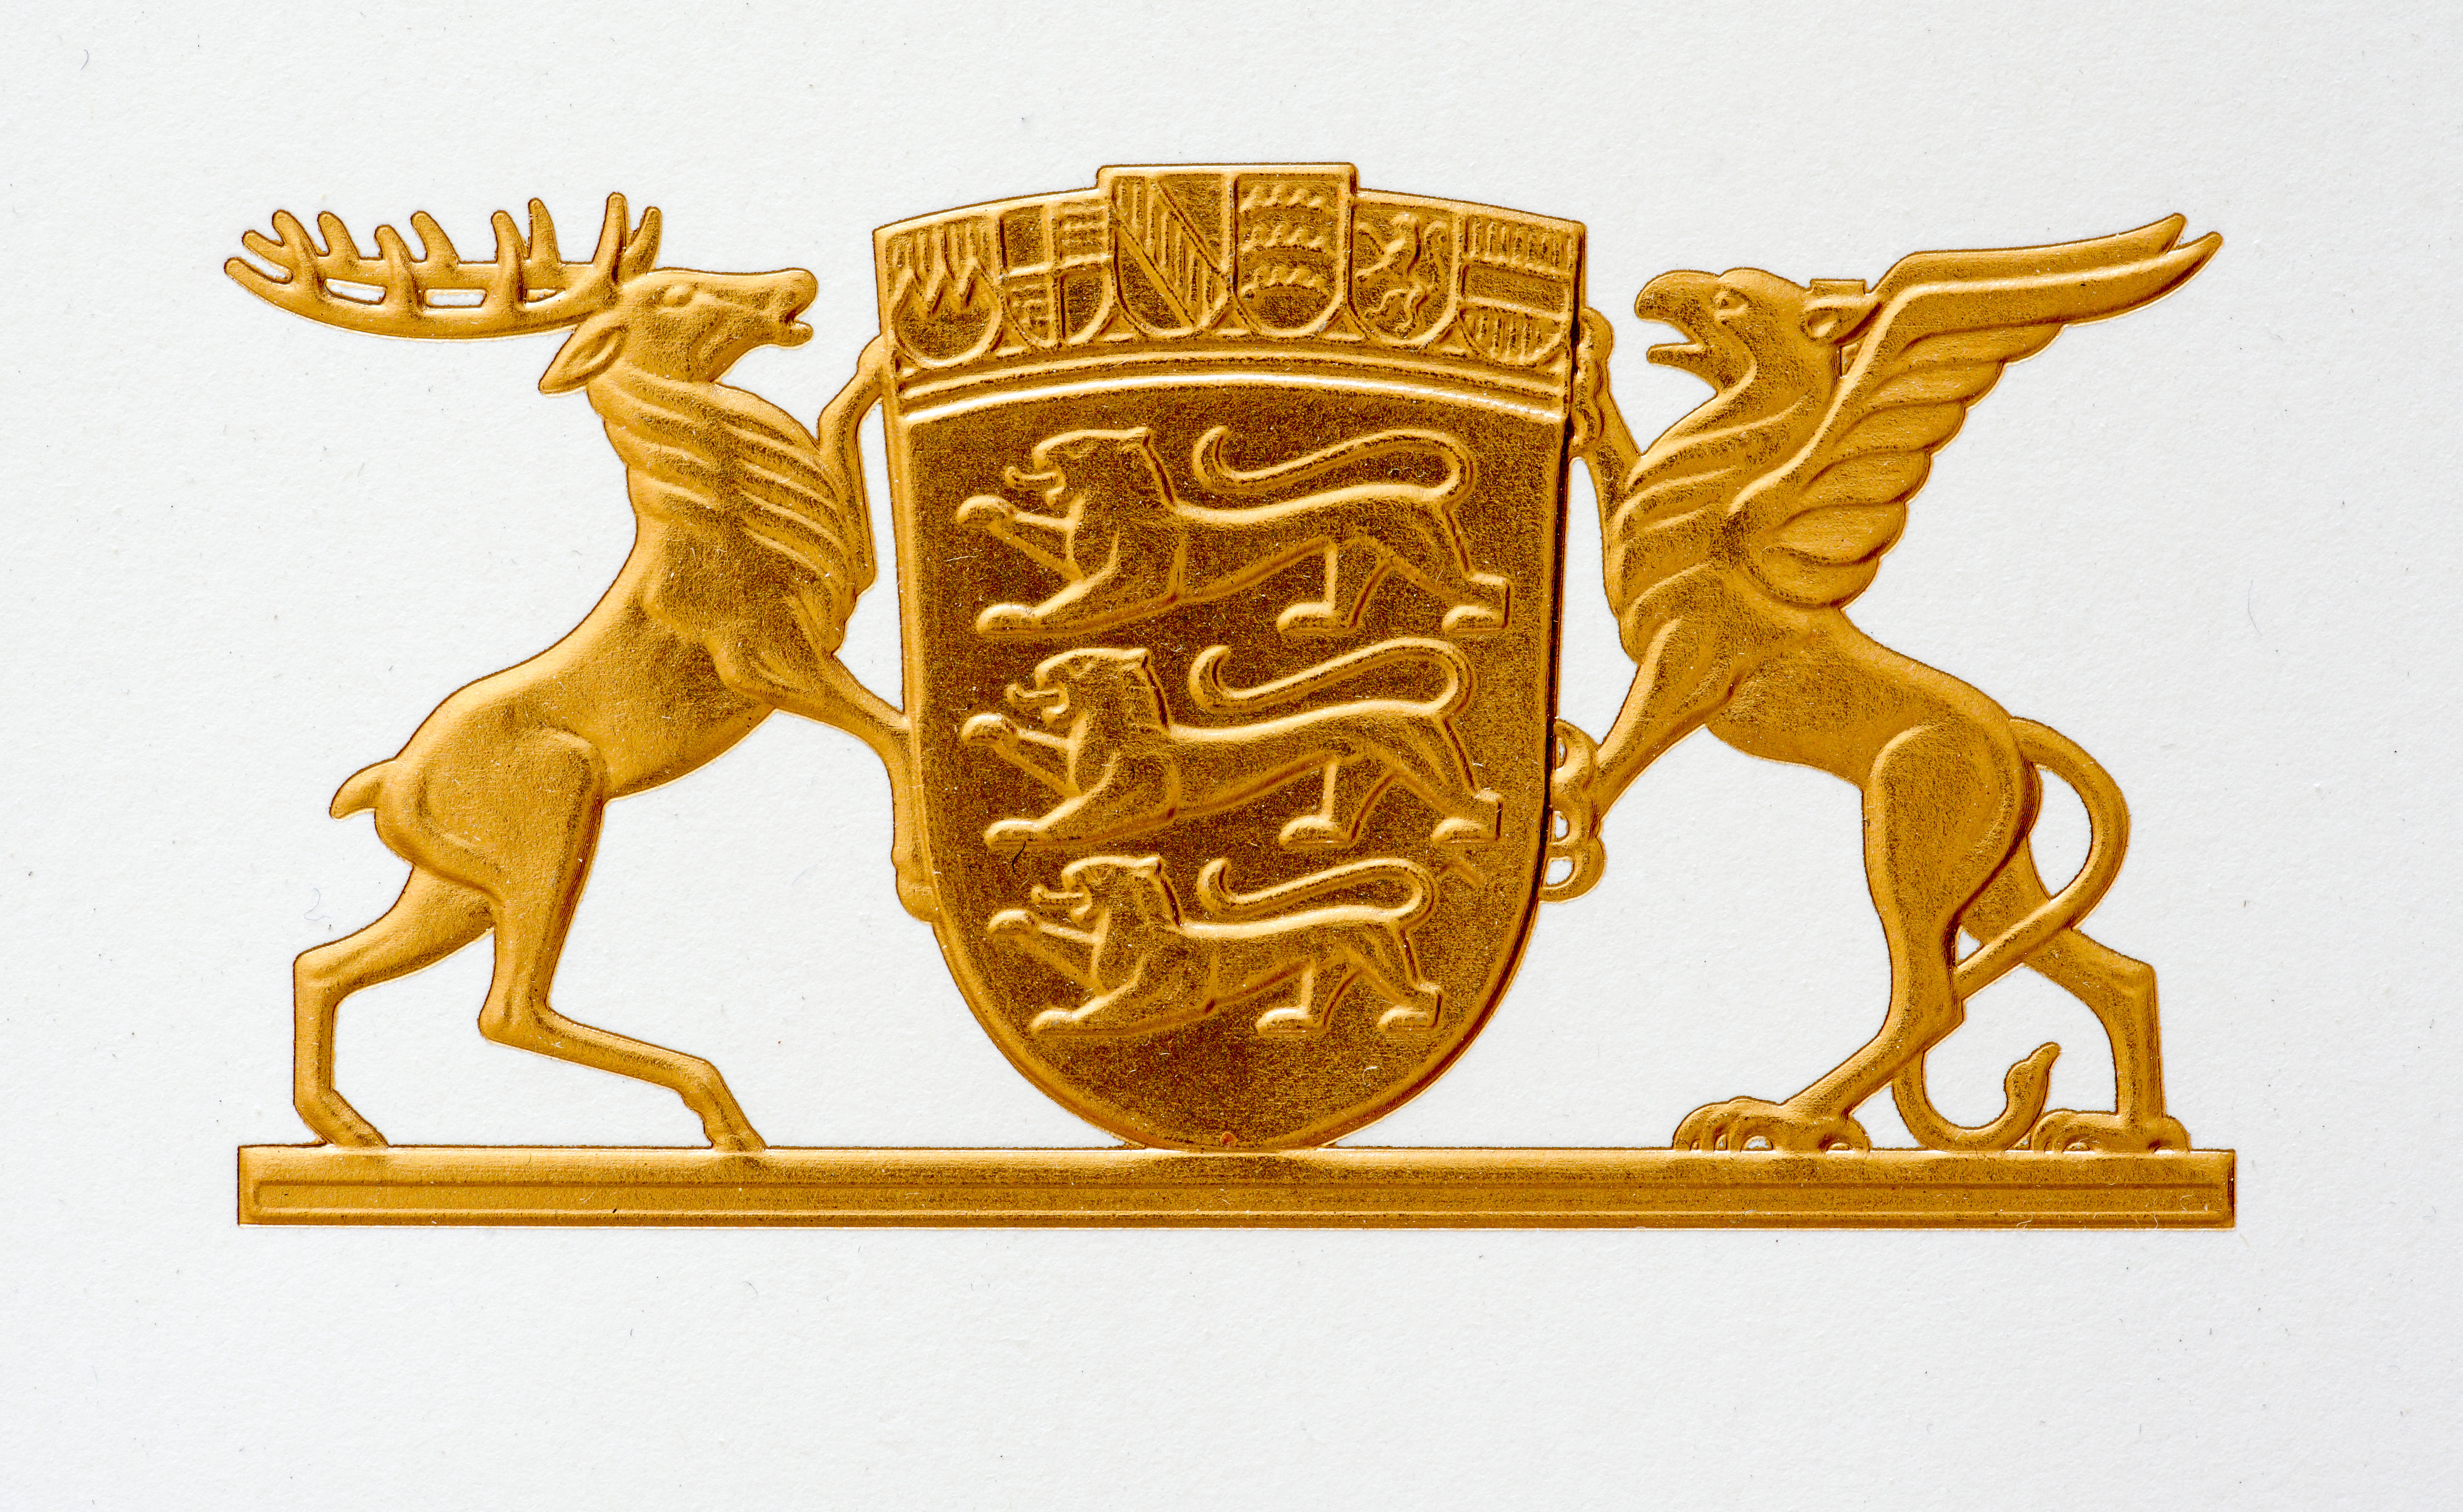 Foil_stamping_Coat_of_Arms gold